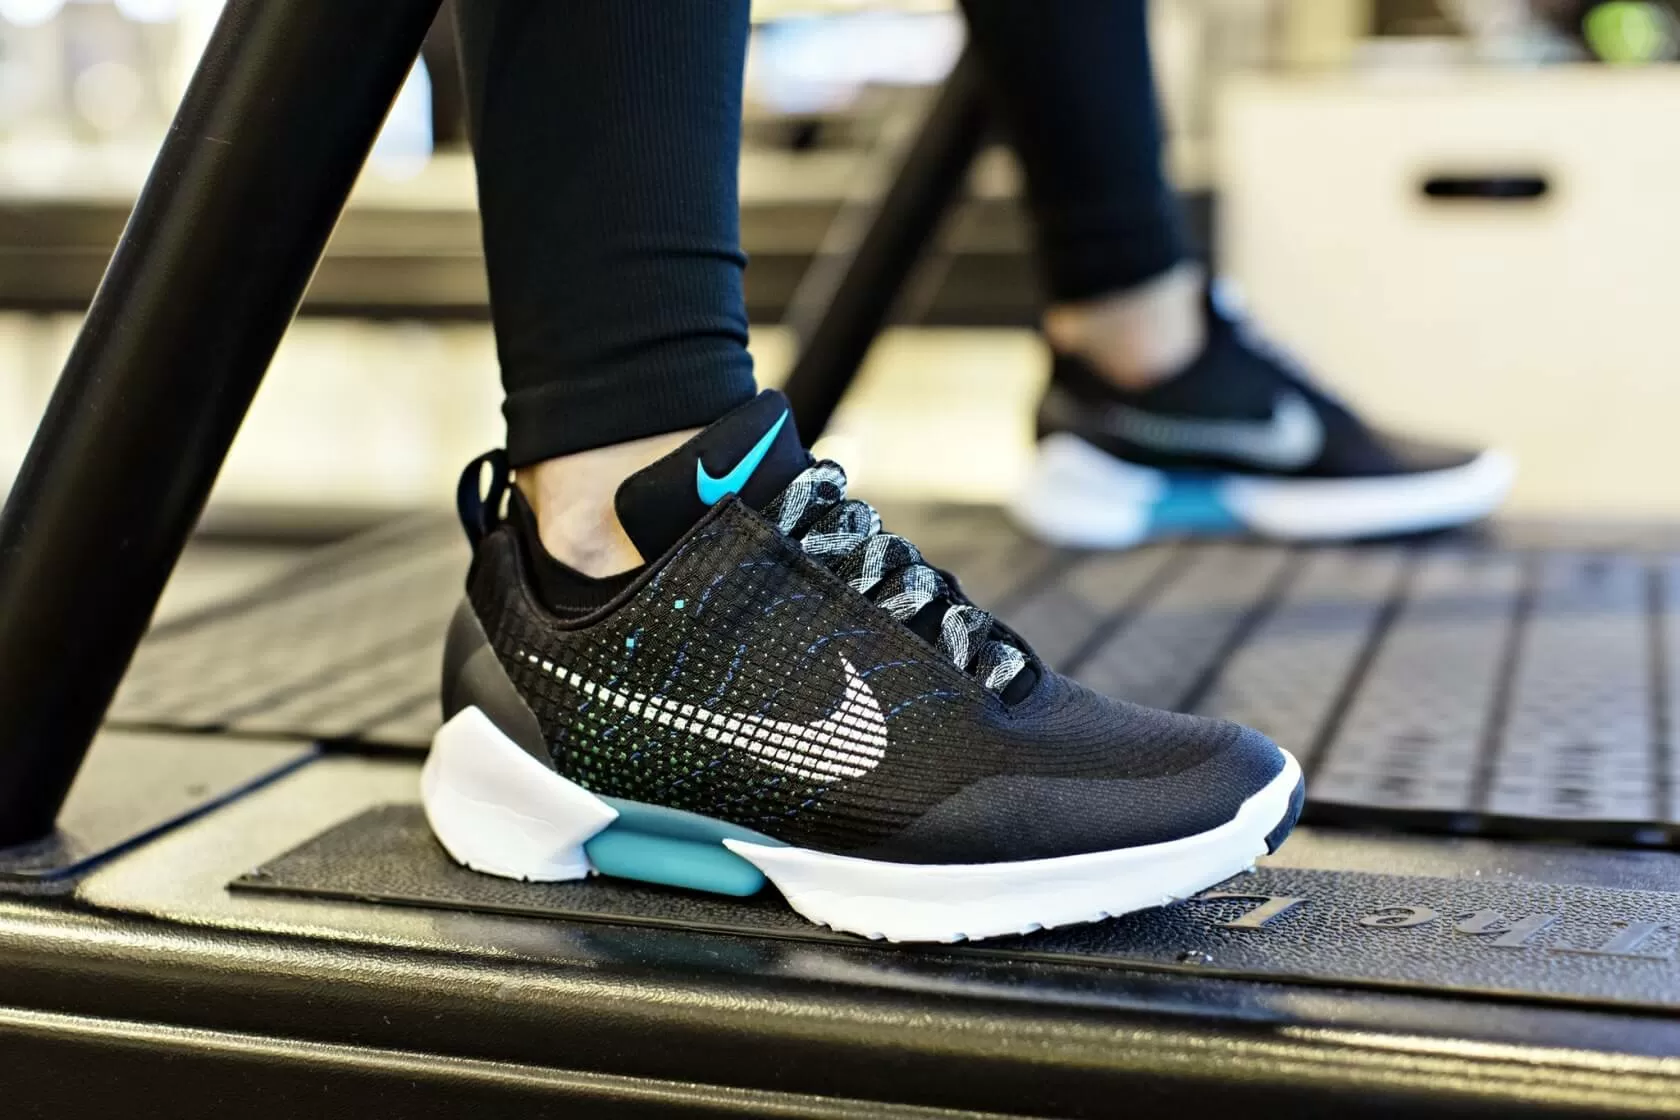 Nike will release 2nd gen self-lacing shoes at half of the TechSpot